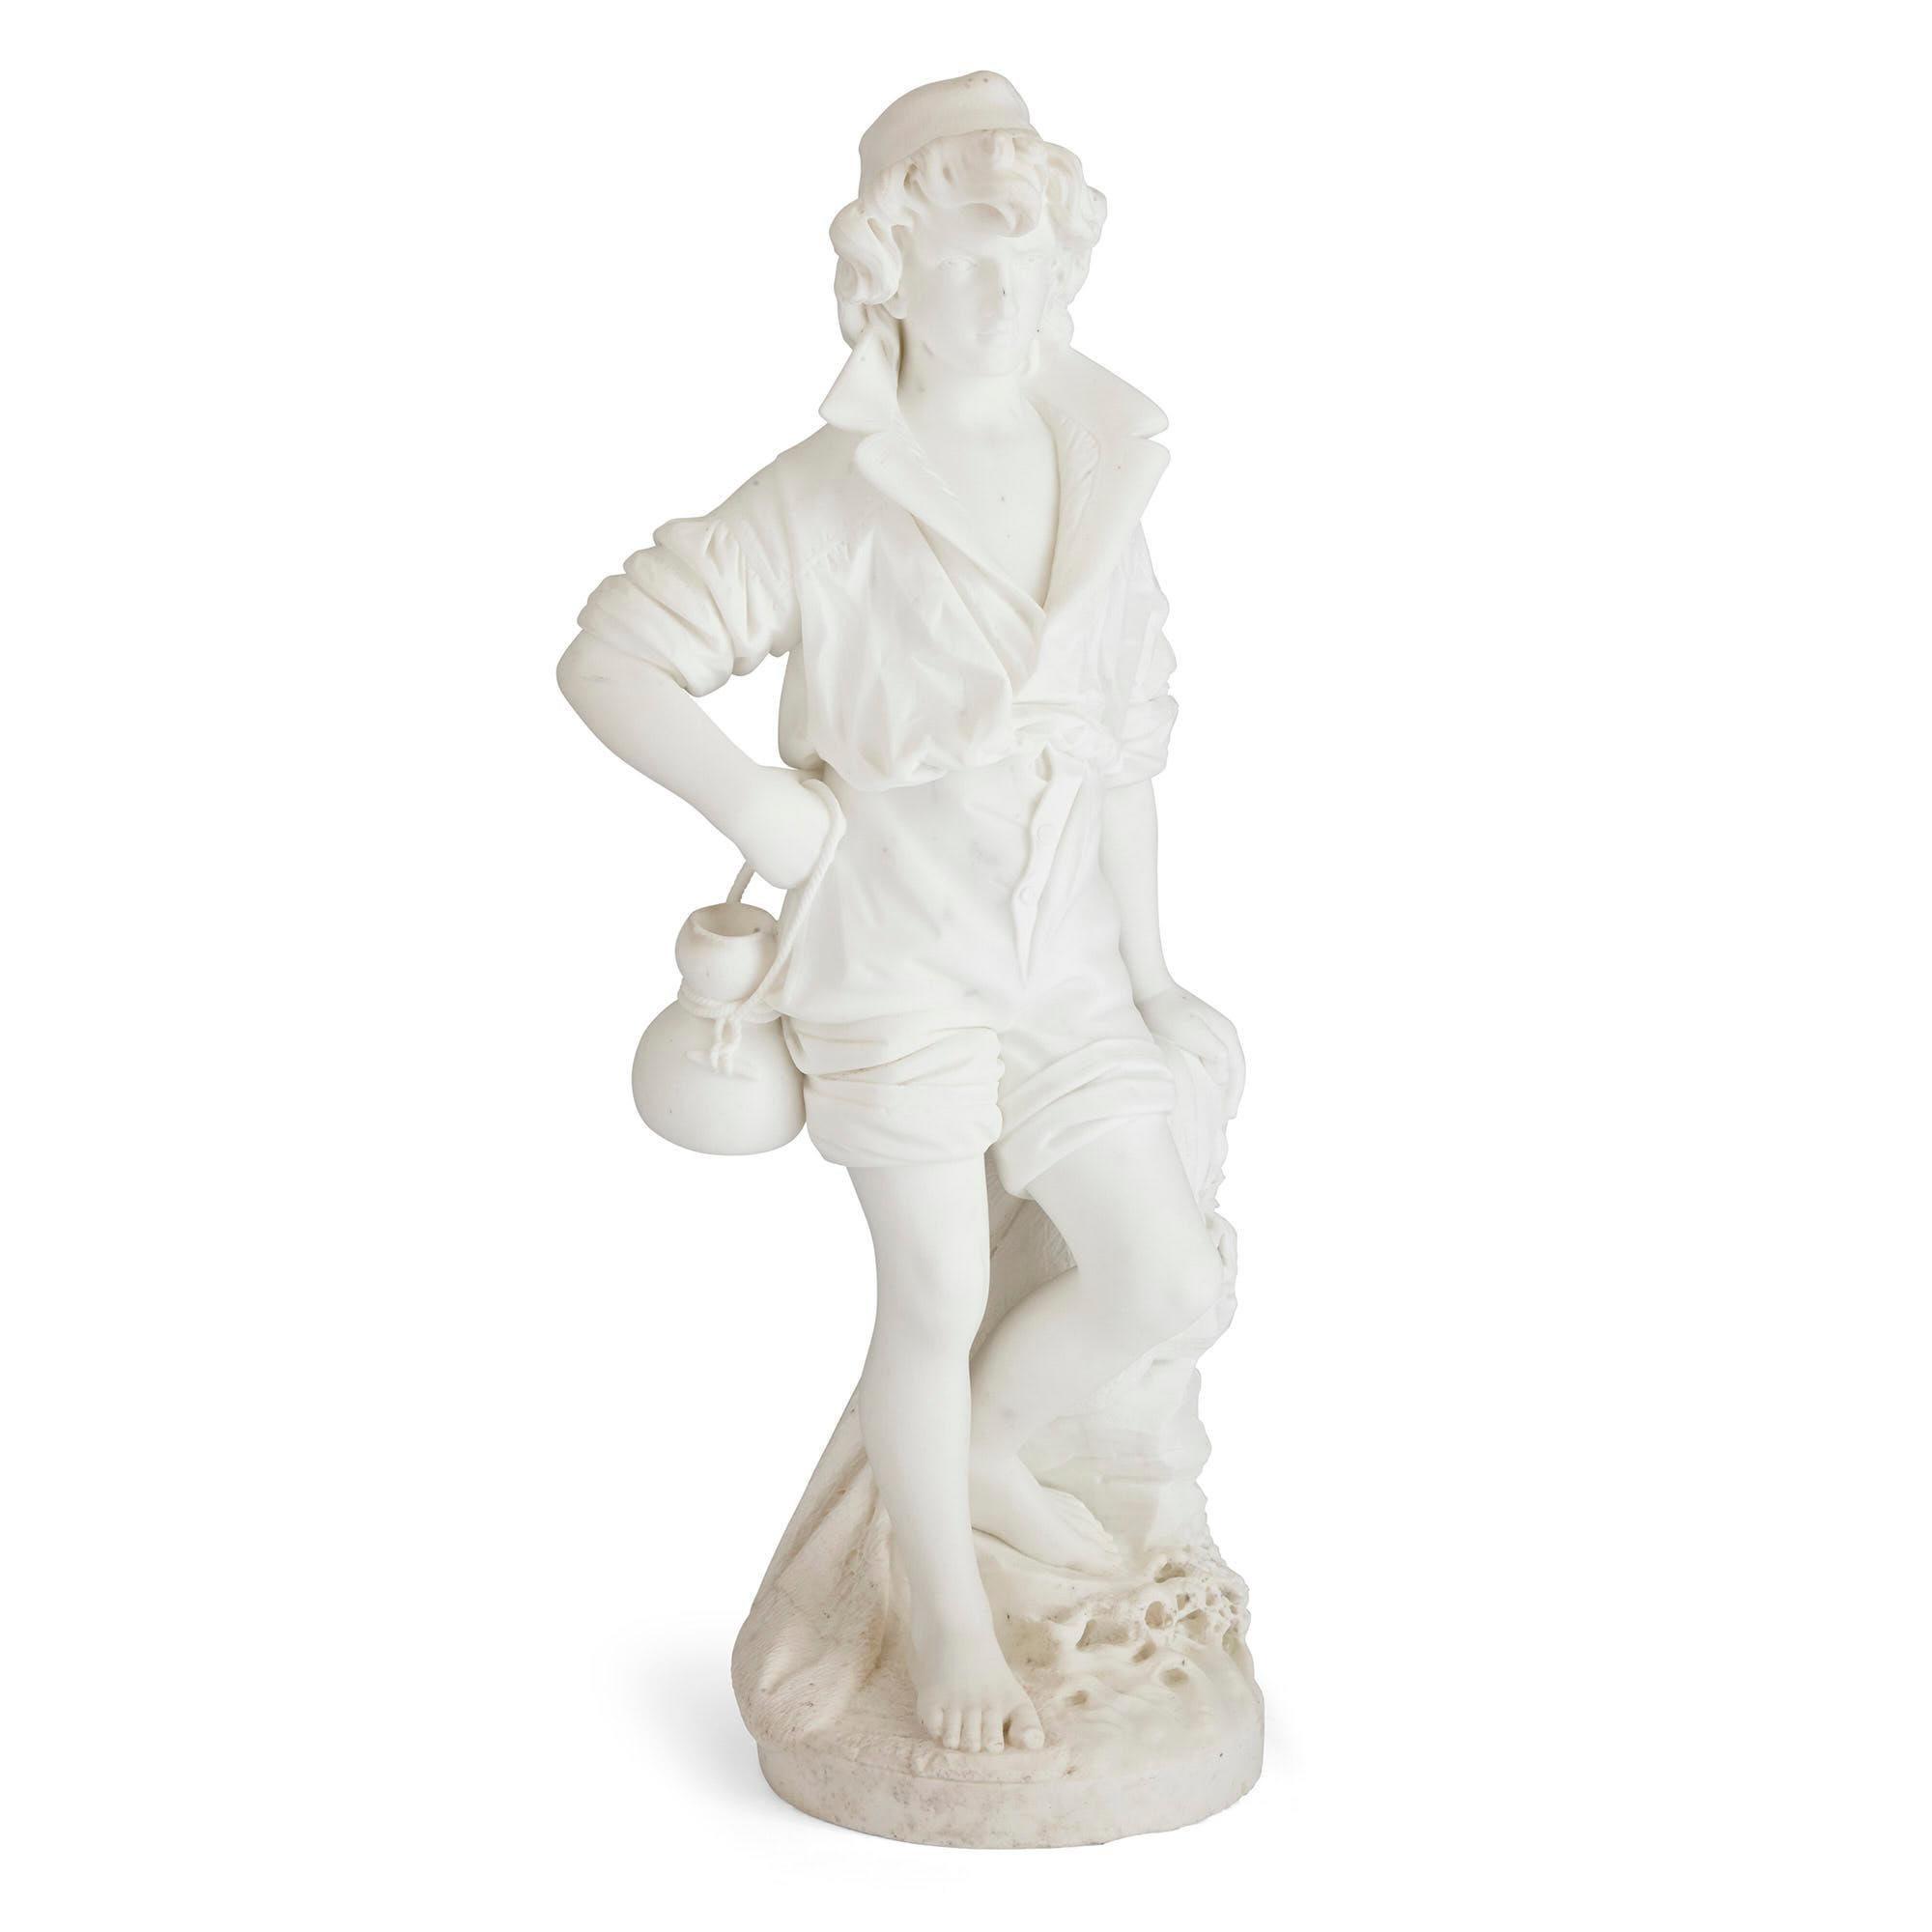 Large Italian marble sculpture by Pietro Bazzanti
Italian, late 19th century
Measures: Height 105cm, width 45cm, depth 40cm

The present sculpture, carved from brilliant white marble, depicts a young boy standing on a rocky, naturalistically